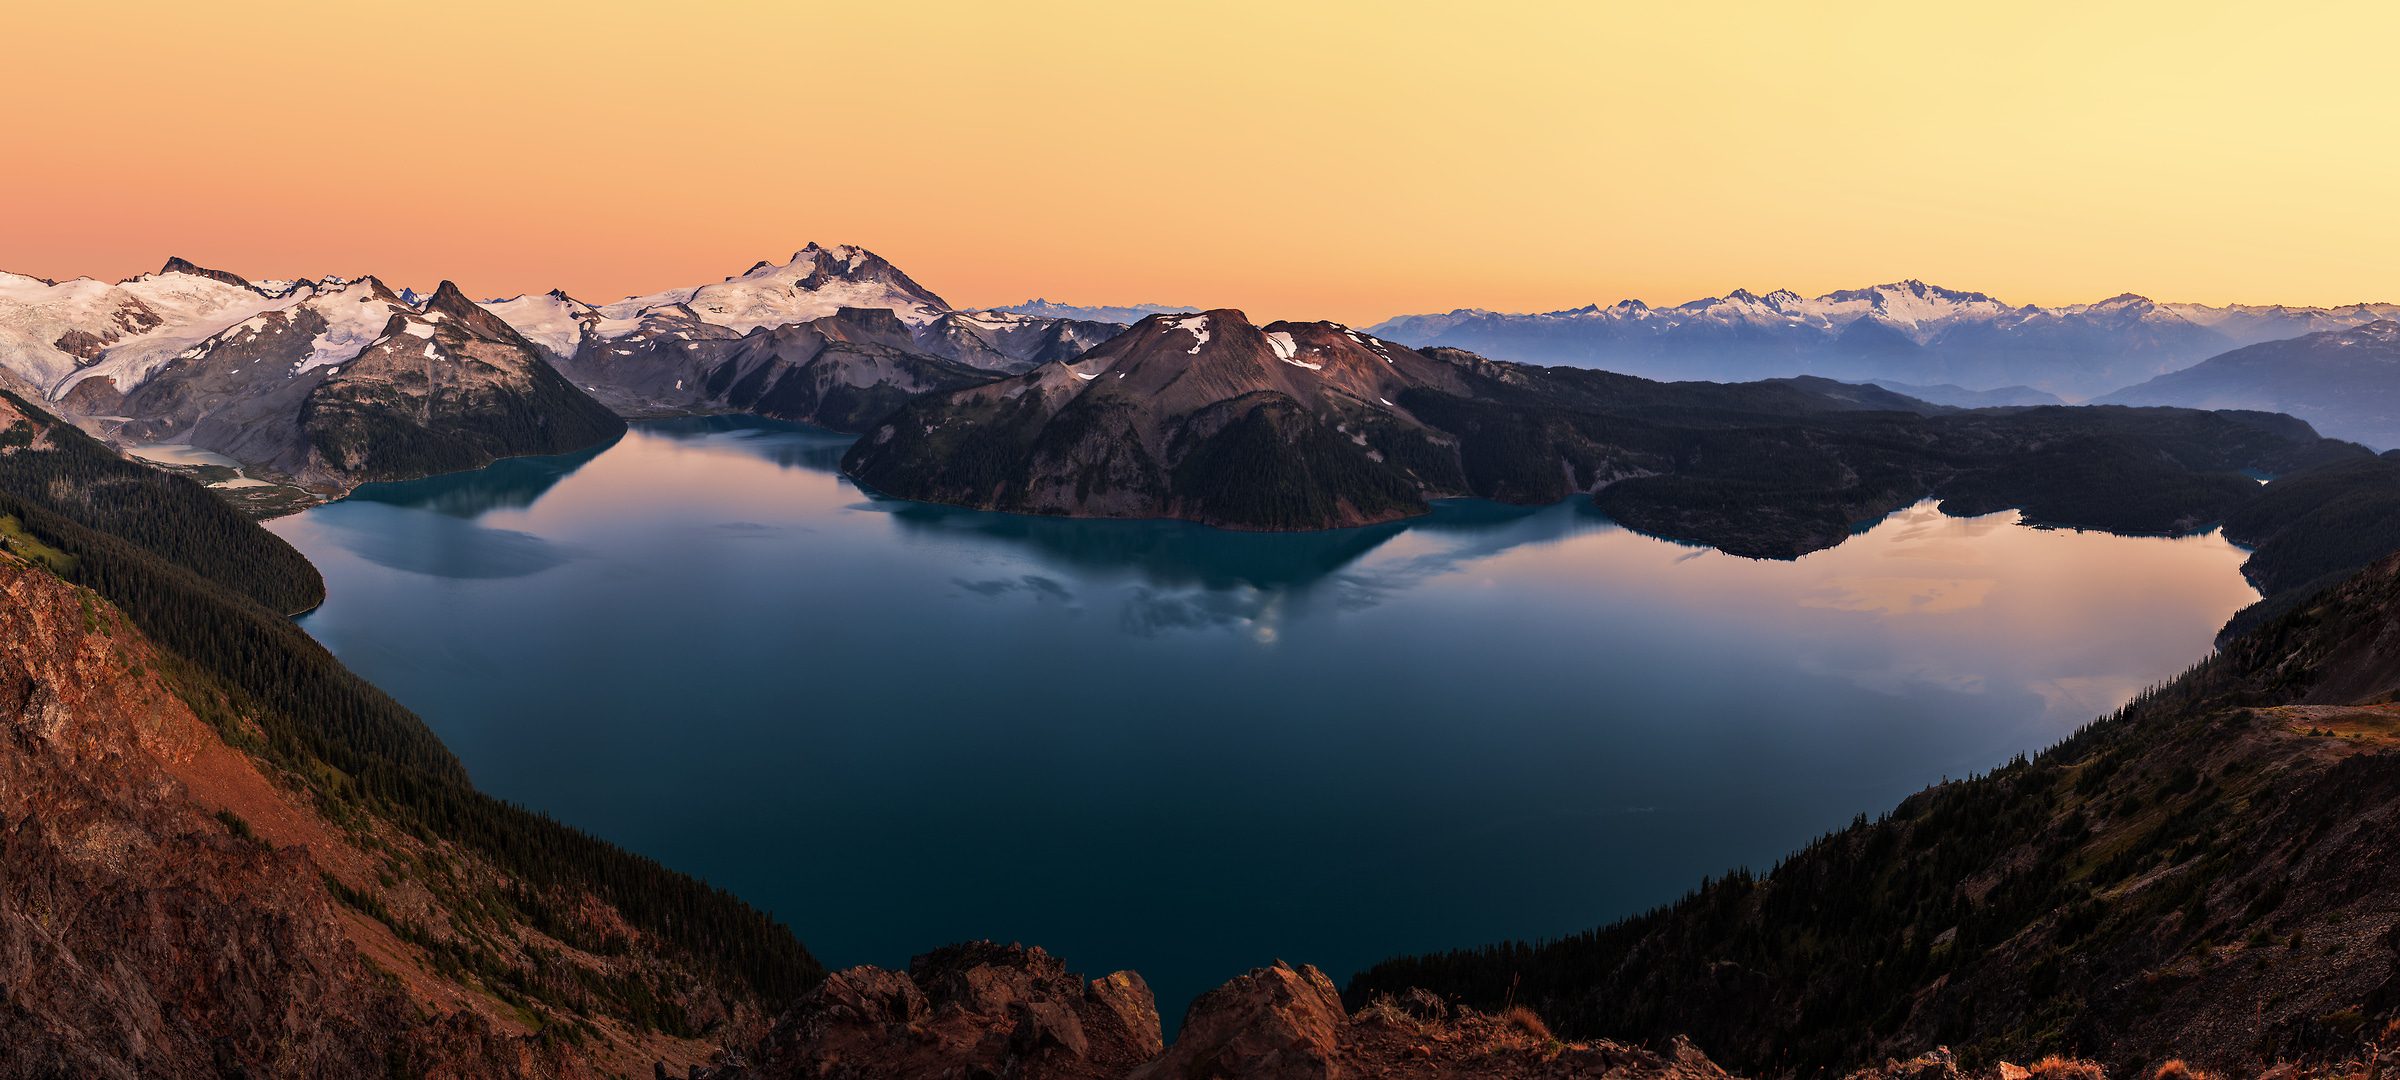 315 megapixels! A very high resolution, large-format VAST photo print of mountains, lakes, and Garibaldi Lake; fine art landscape photo created by Chris Collacott in Garibaldi Provincial Park, British Columbia, Canada